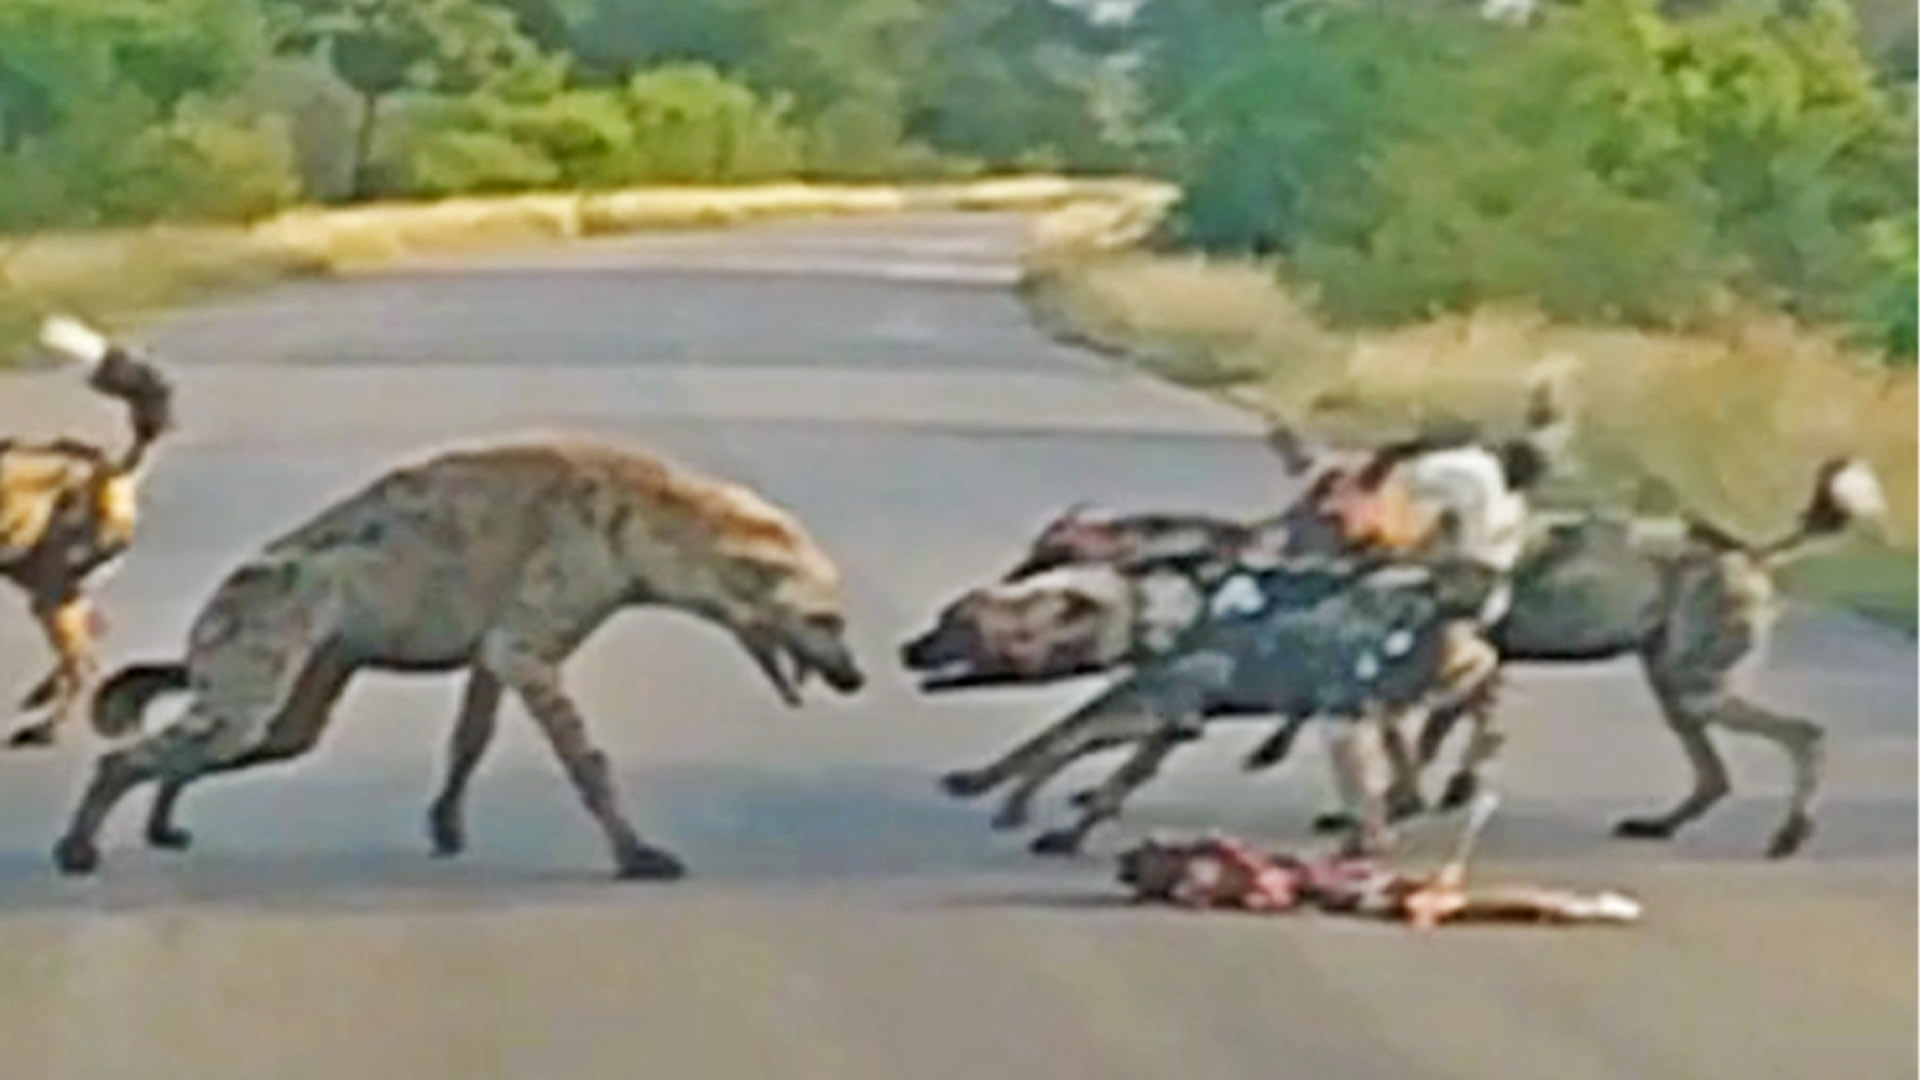 Battle Between Wild Dogs and Spotted Hyenas